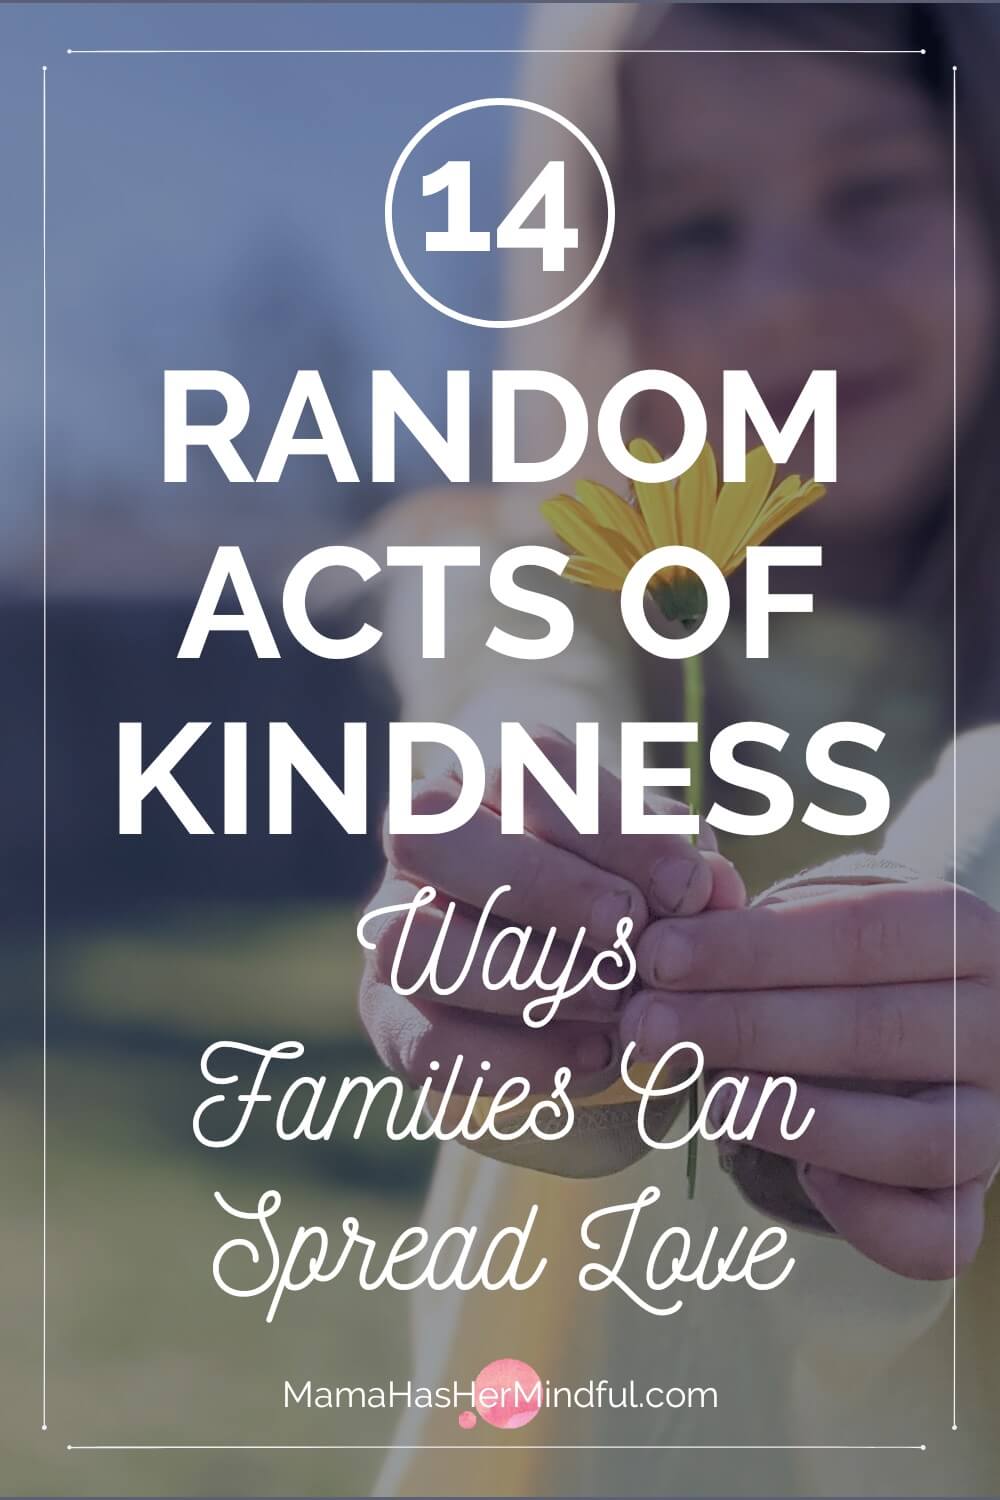 14 Random Acts of Kindness: Ways Families Can Spread Love